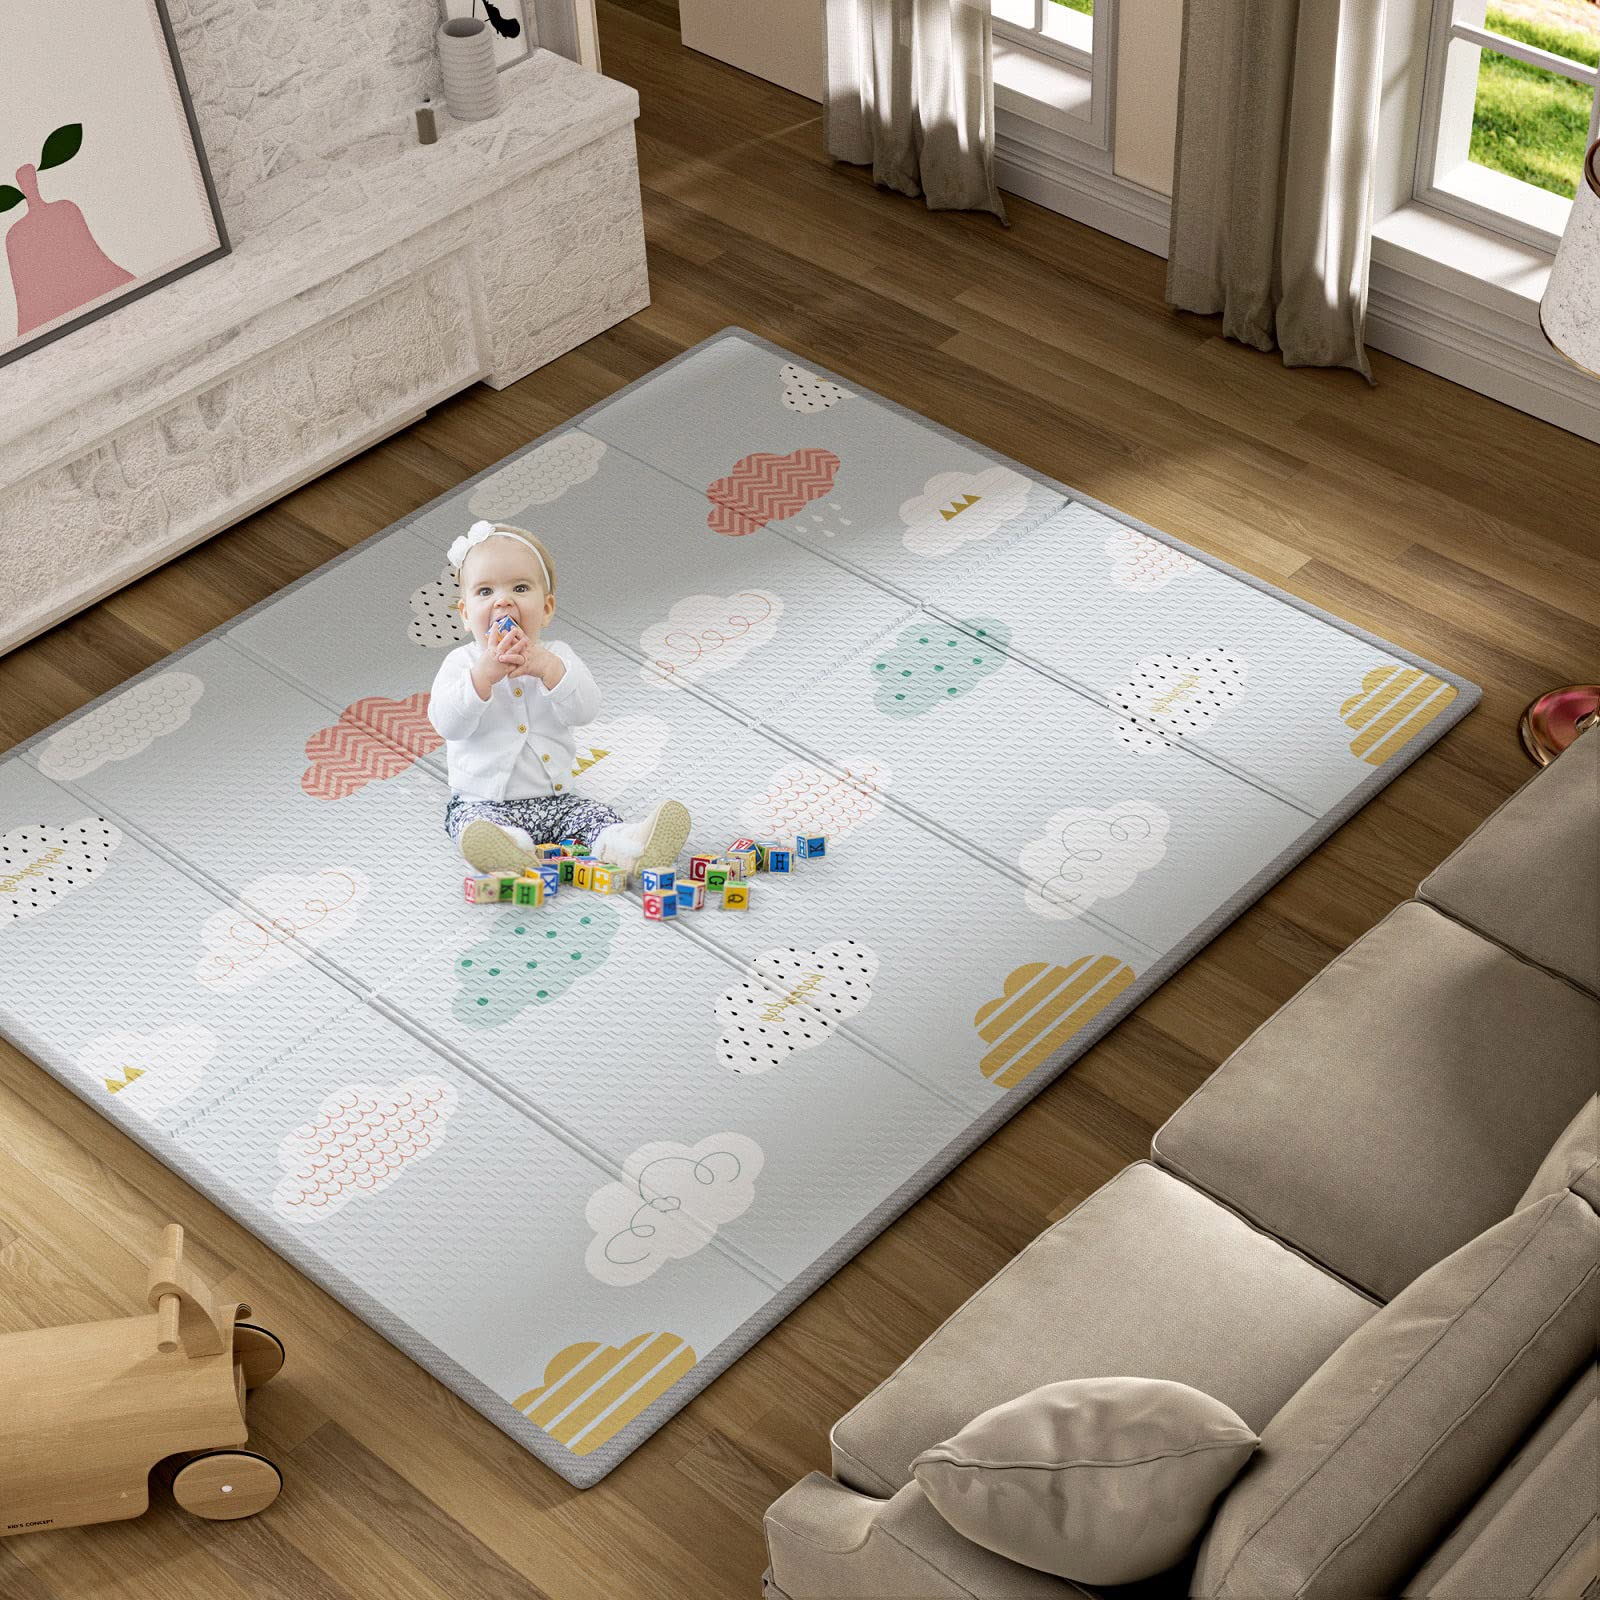 PKINOICY 71x59inch Play Mat for Baby, Crawling Mat for Infants Toddlers Kids,Foldable Kids Play Mat,Waterproof Crawling Mat - image 1 of 7